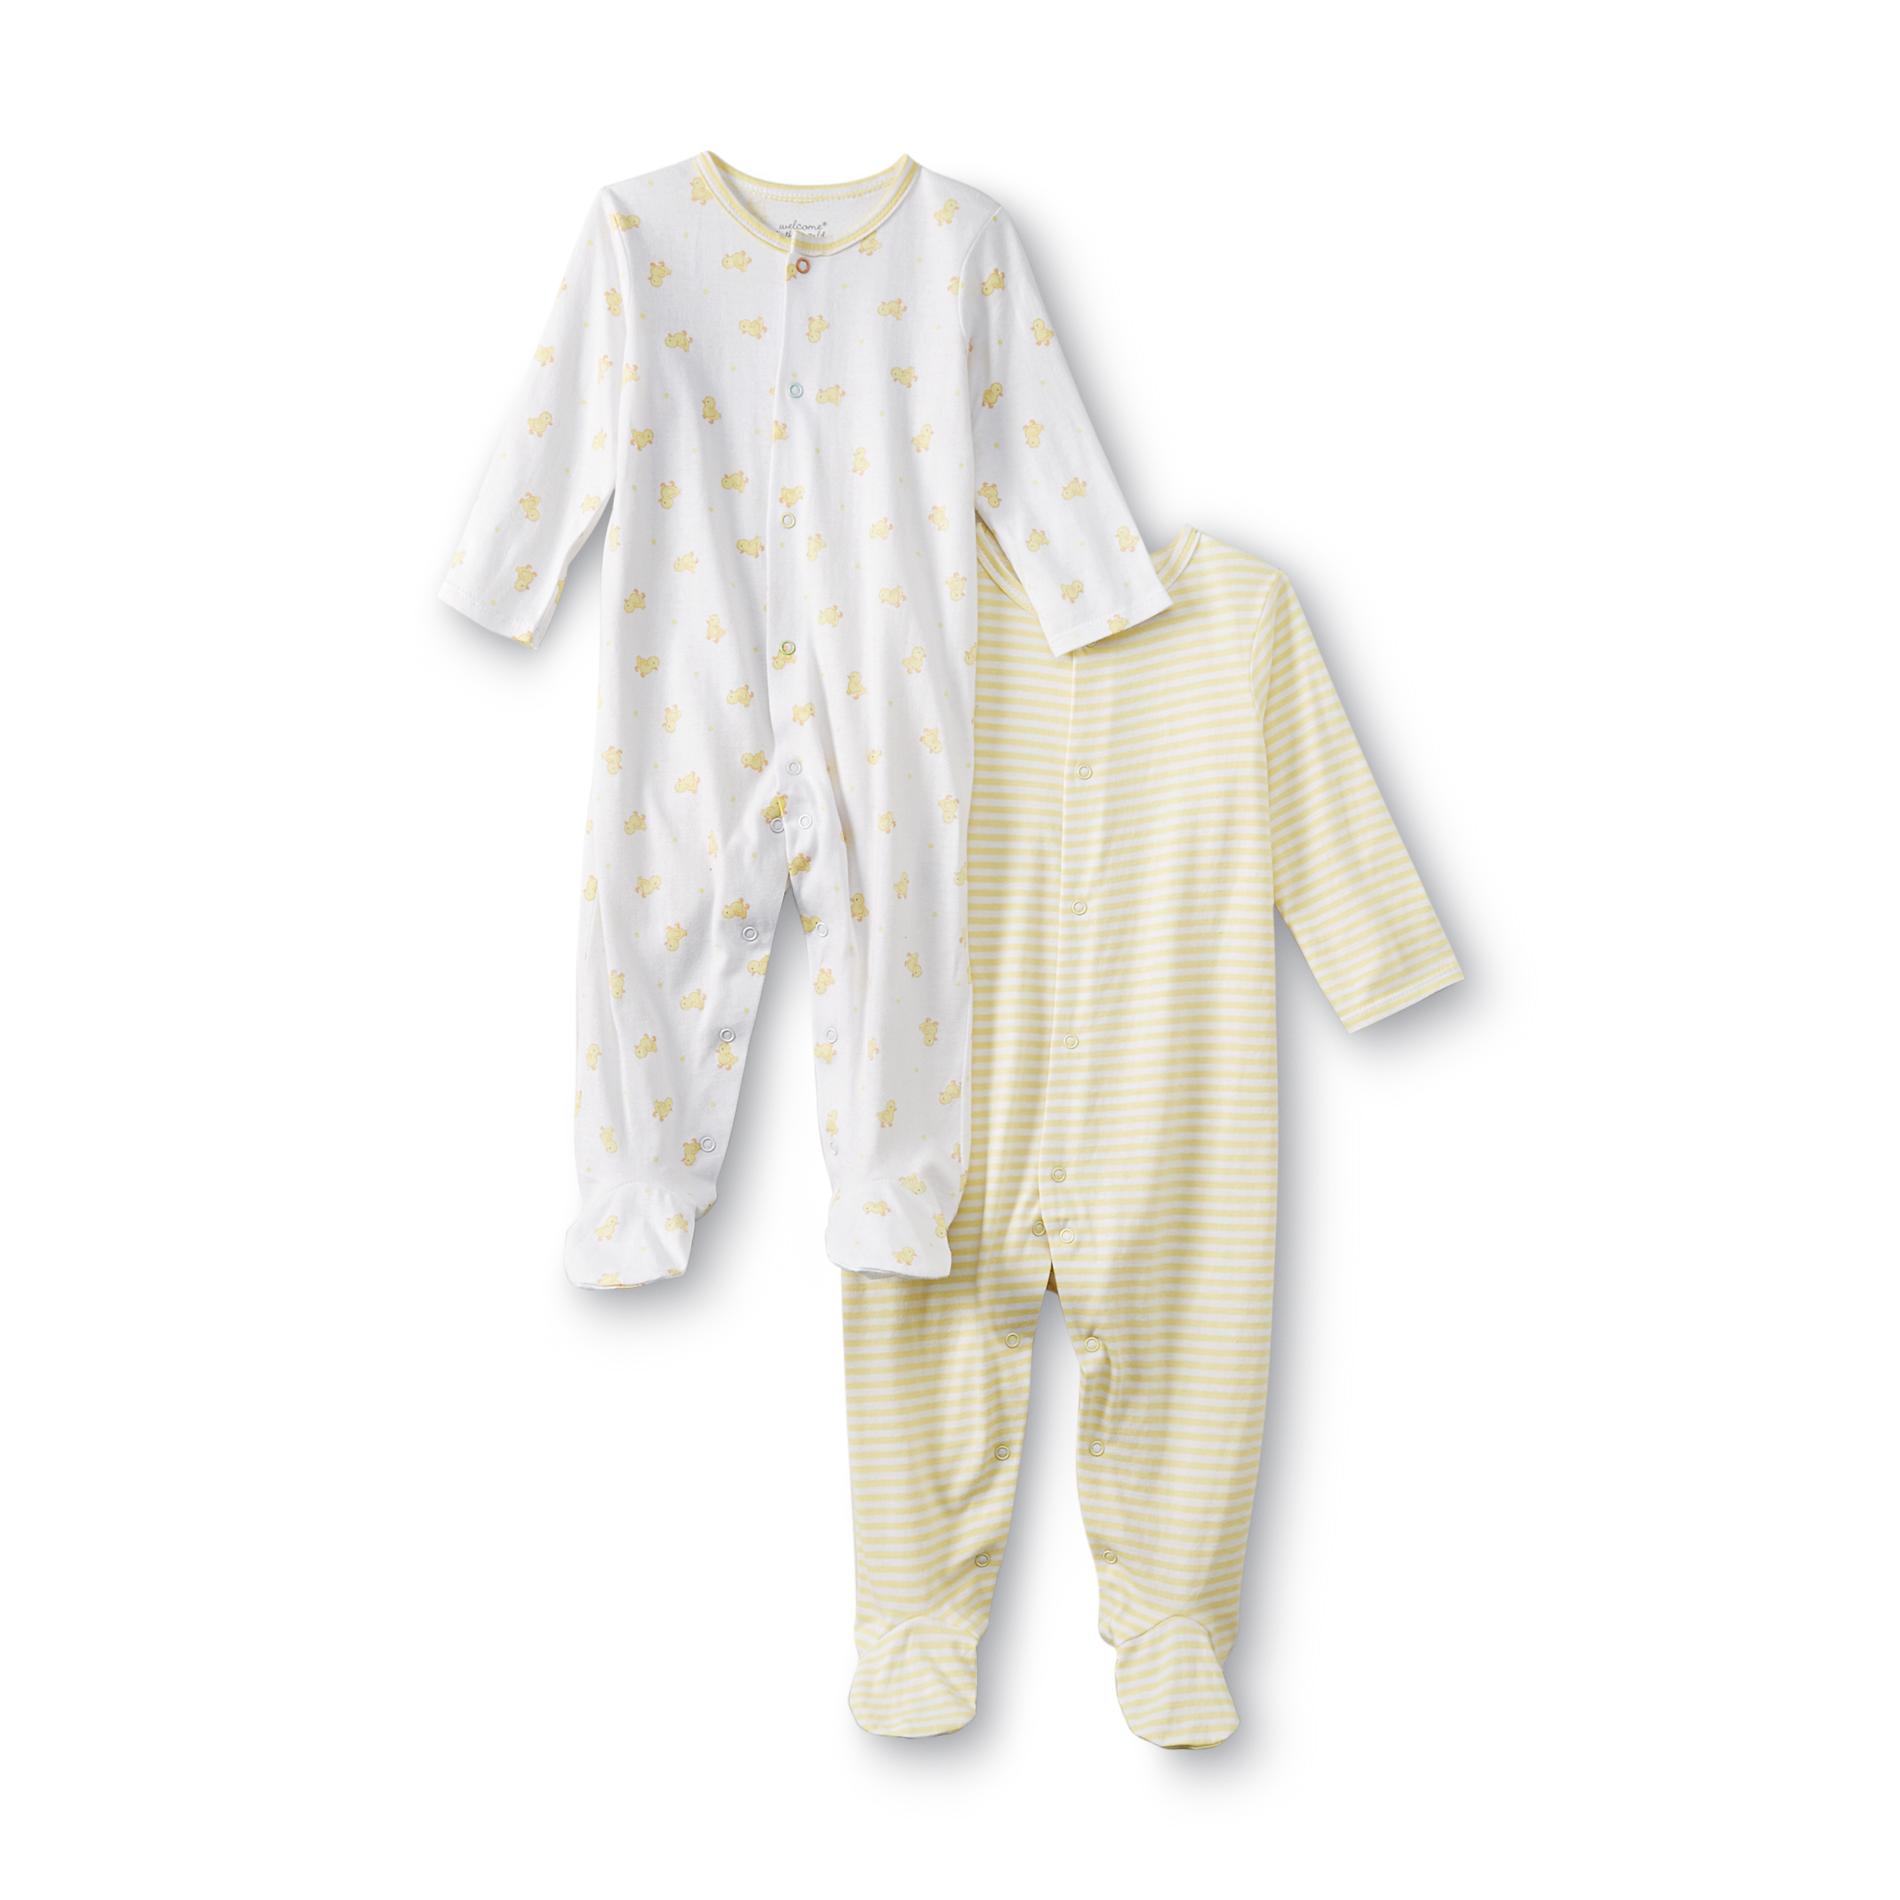 Welcome to the World Newborn 2-Pack Footed Sleepers - Duck